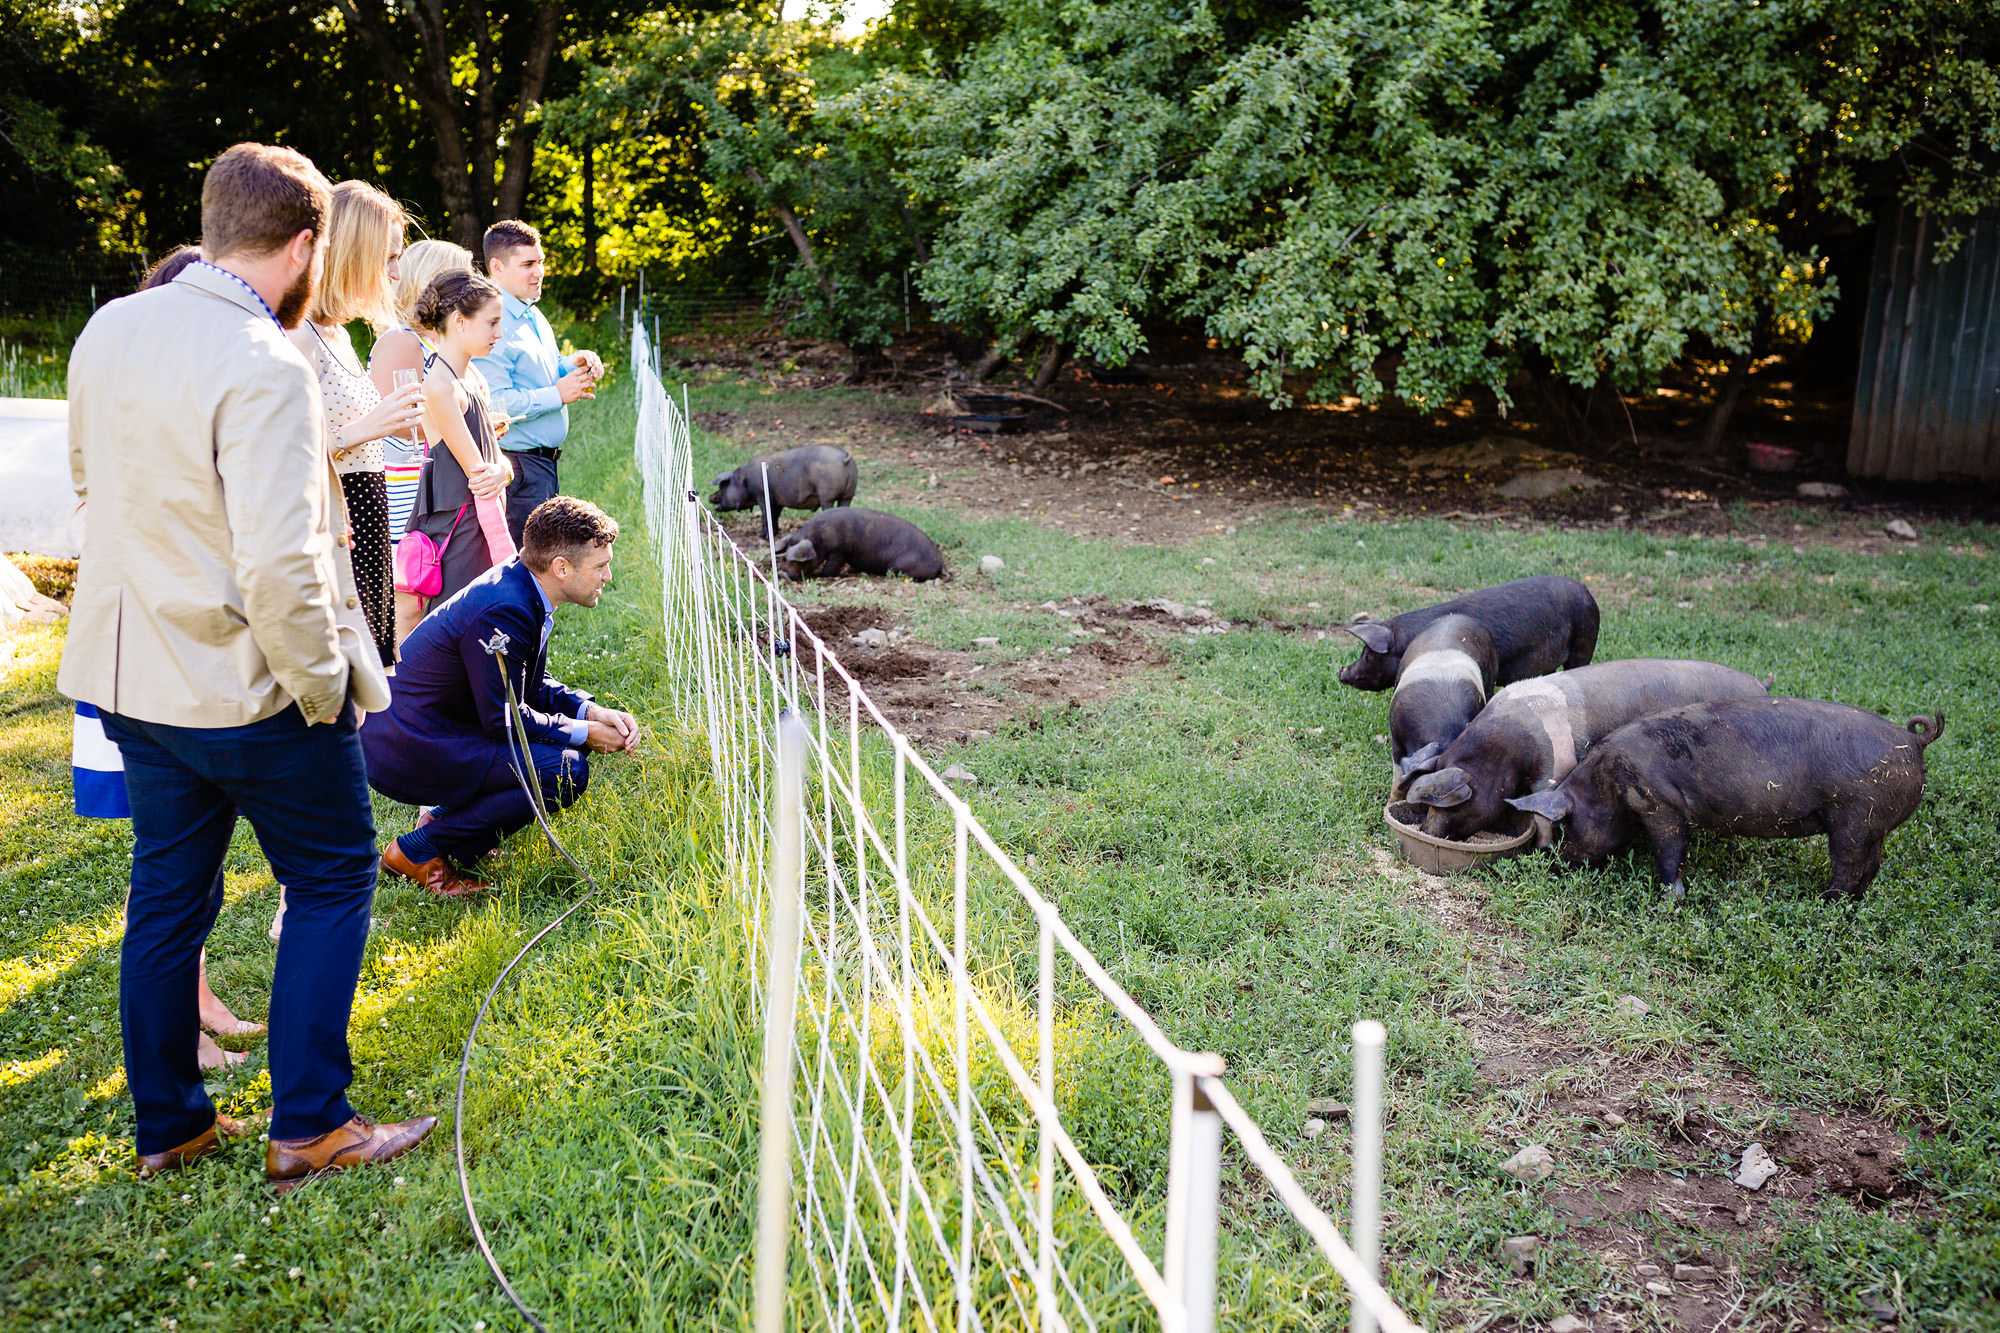 Wedding guests visit the pigs at a wedding at Primo Restaurant in Maine.